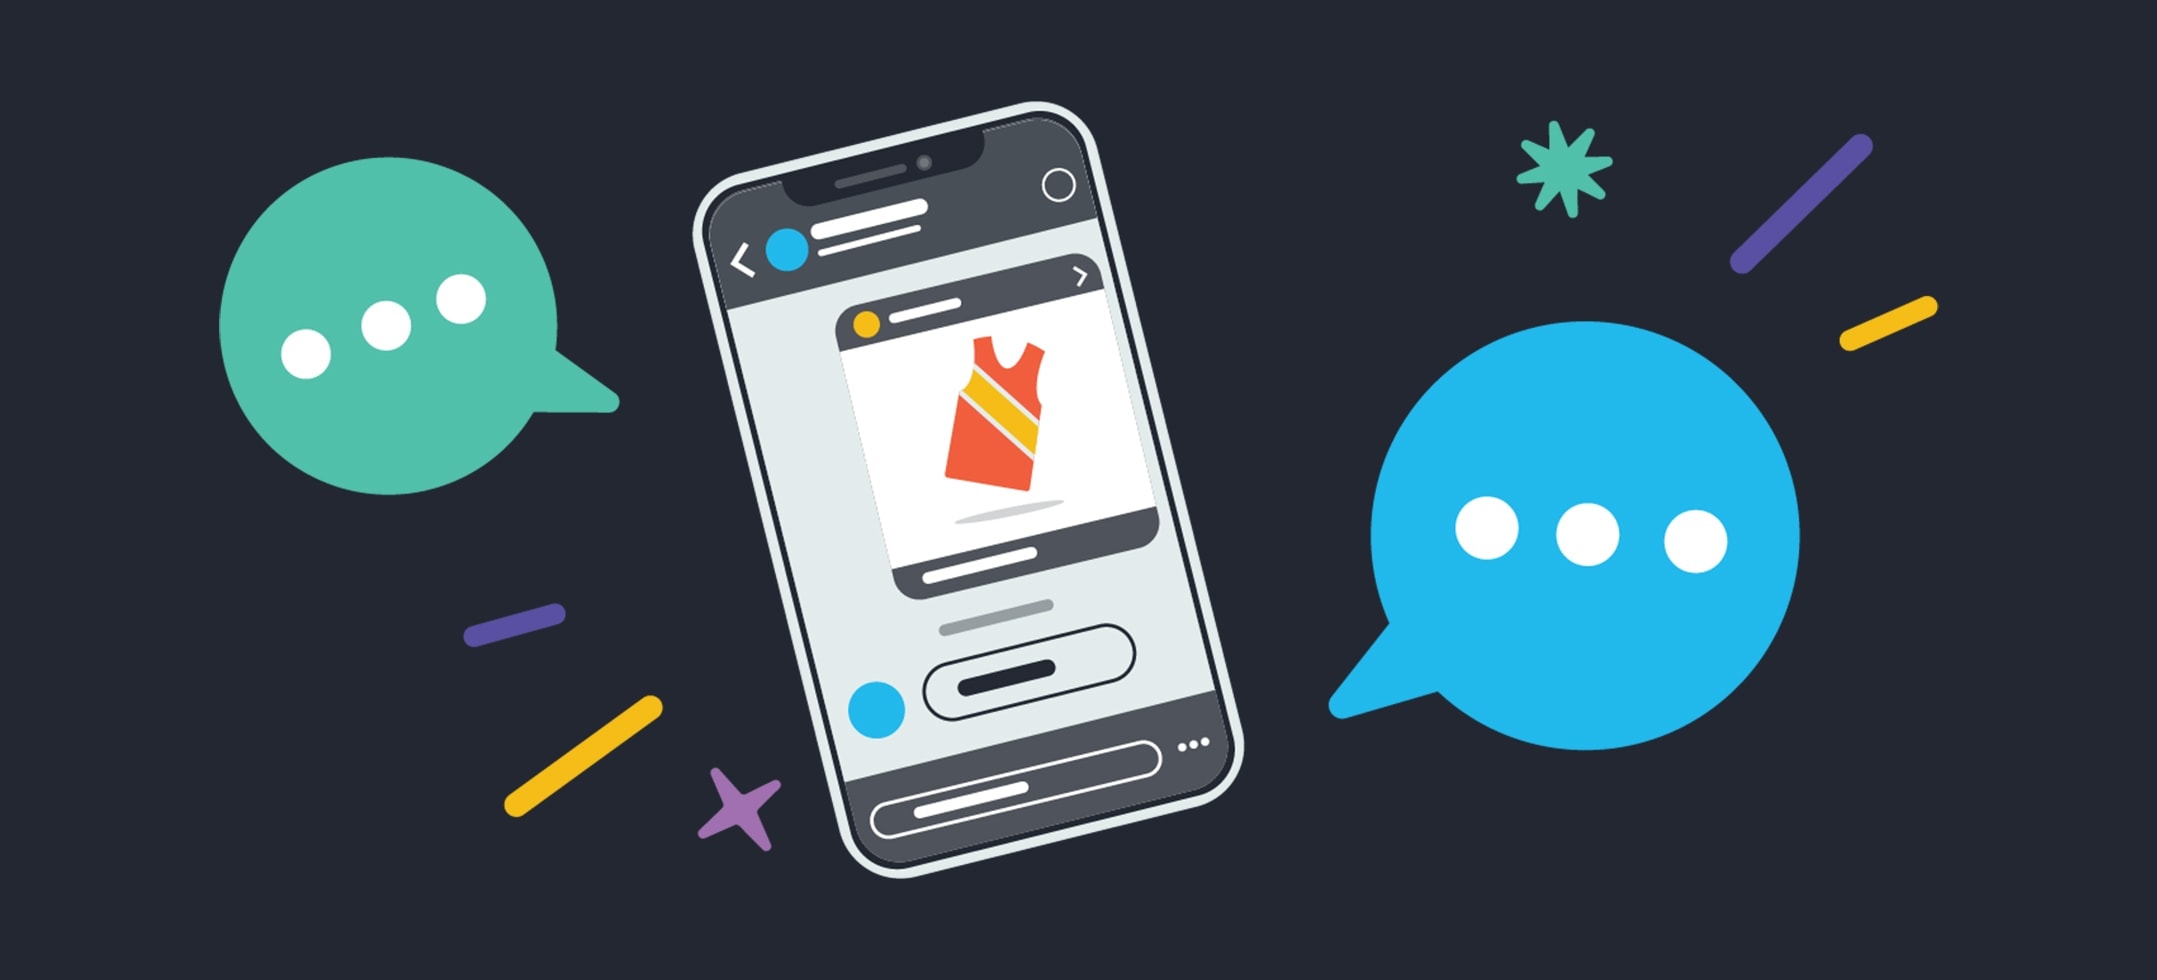 sms vs imessage which one wins at text messaging